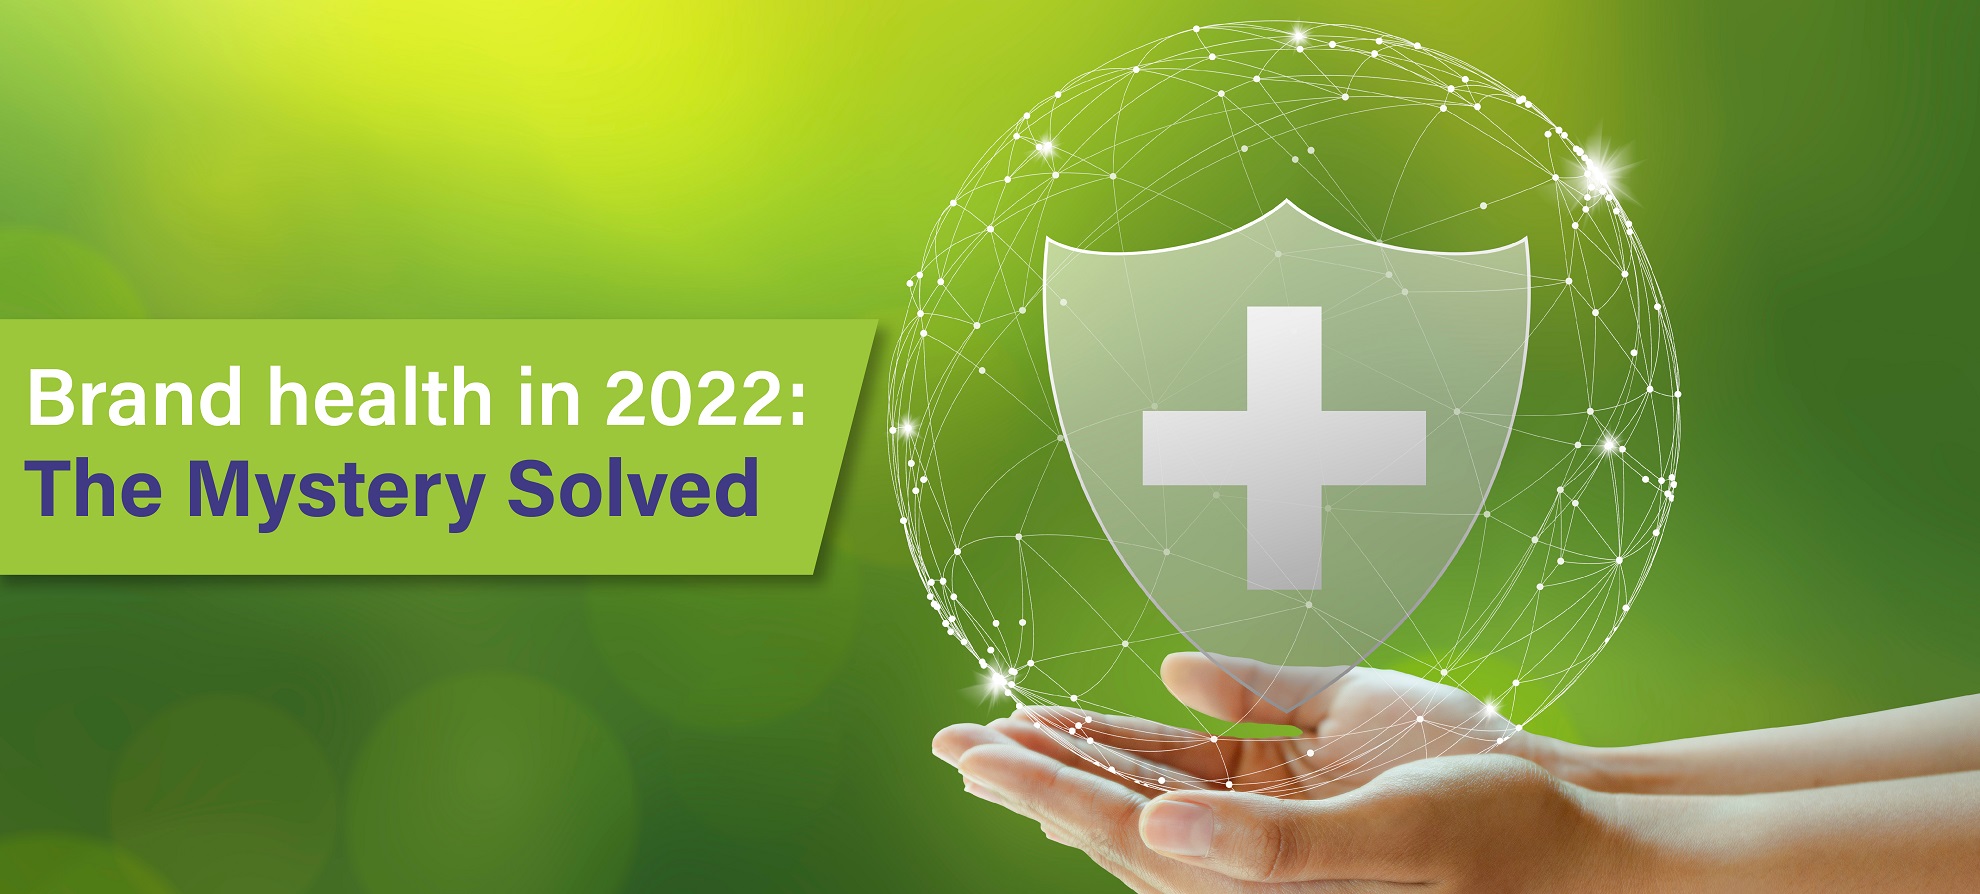 Brand Health in 2022: The Mystery Solved